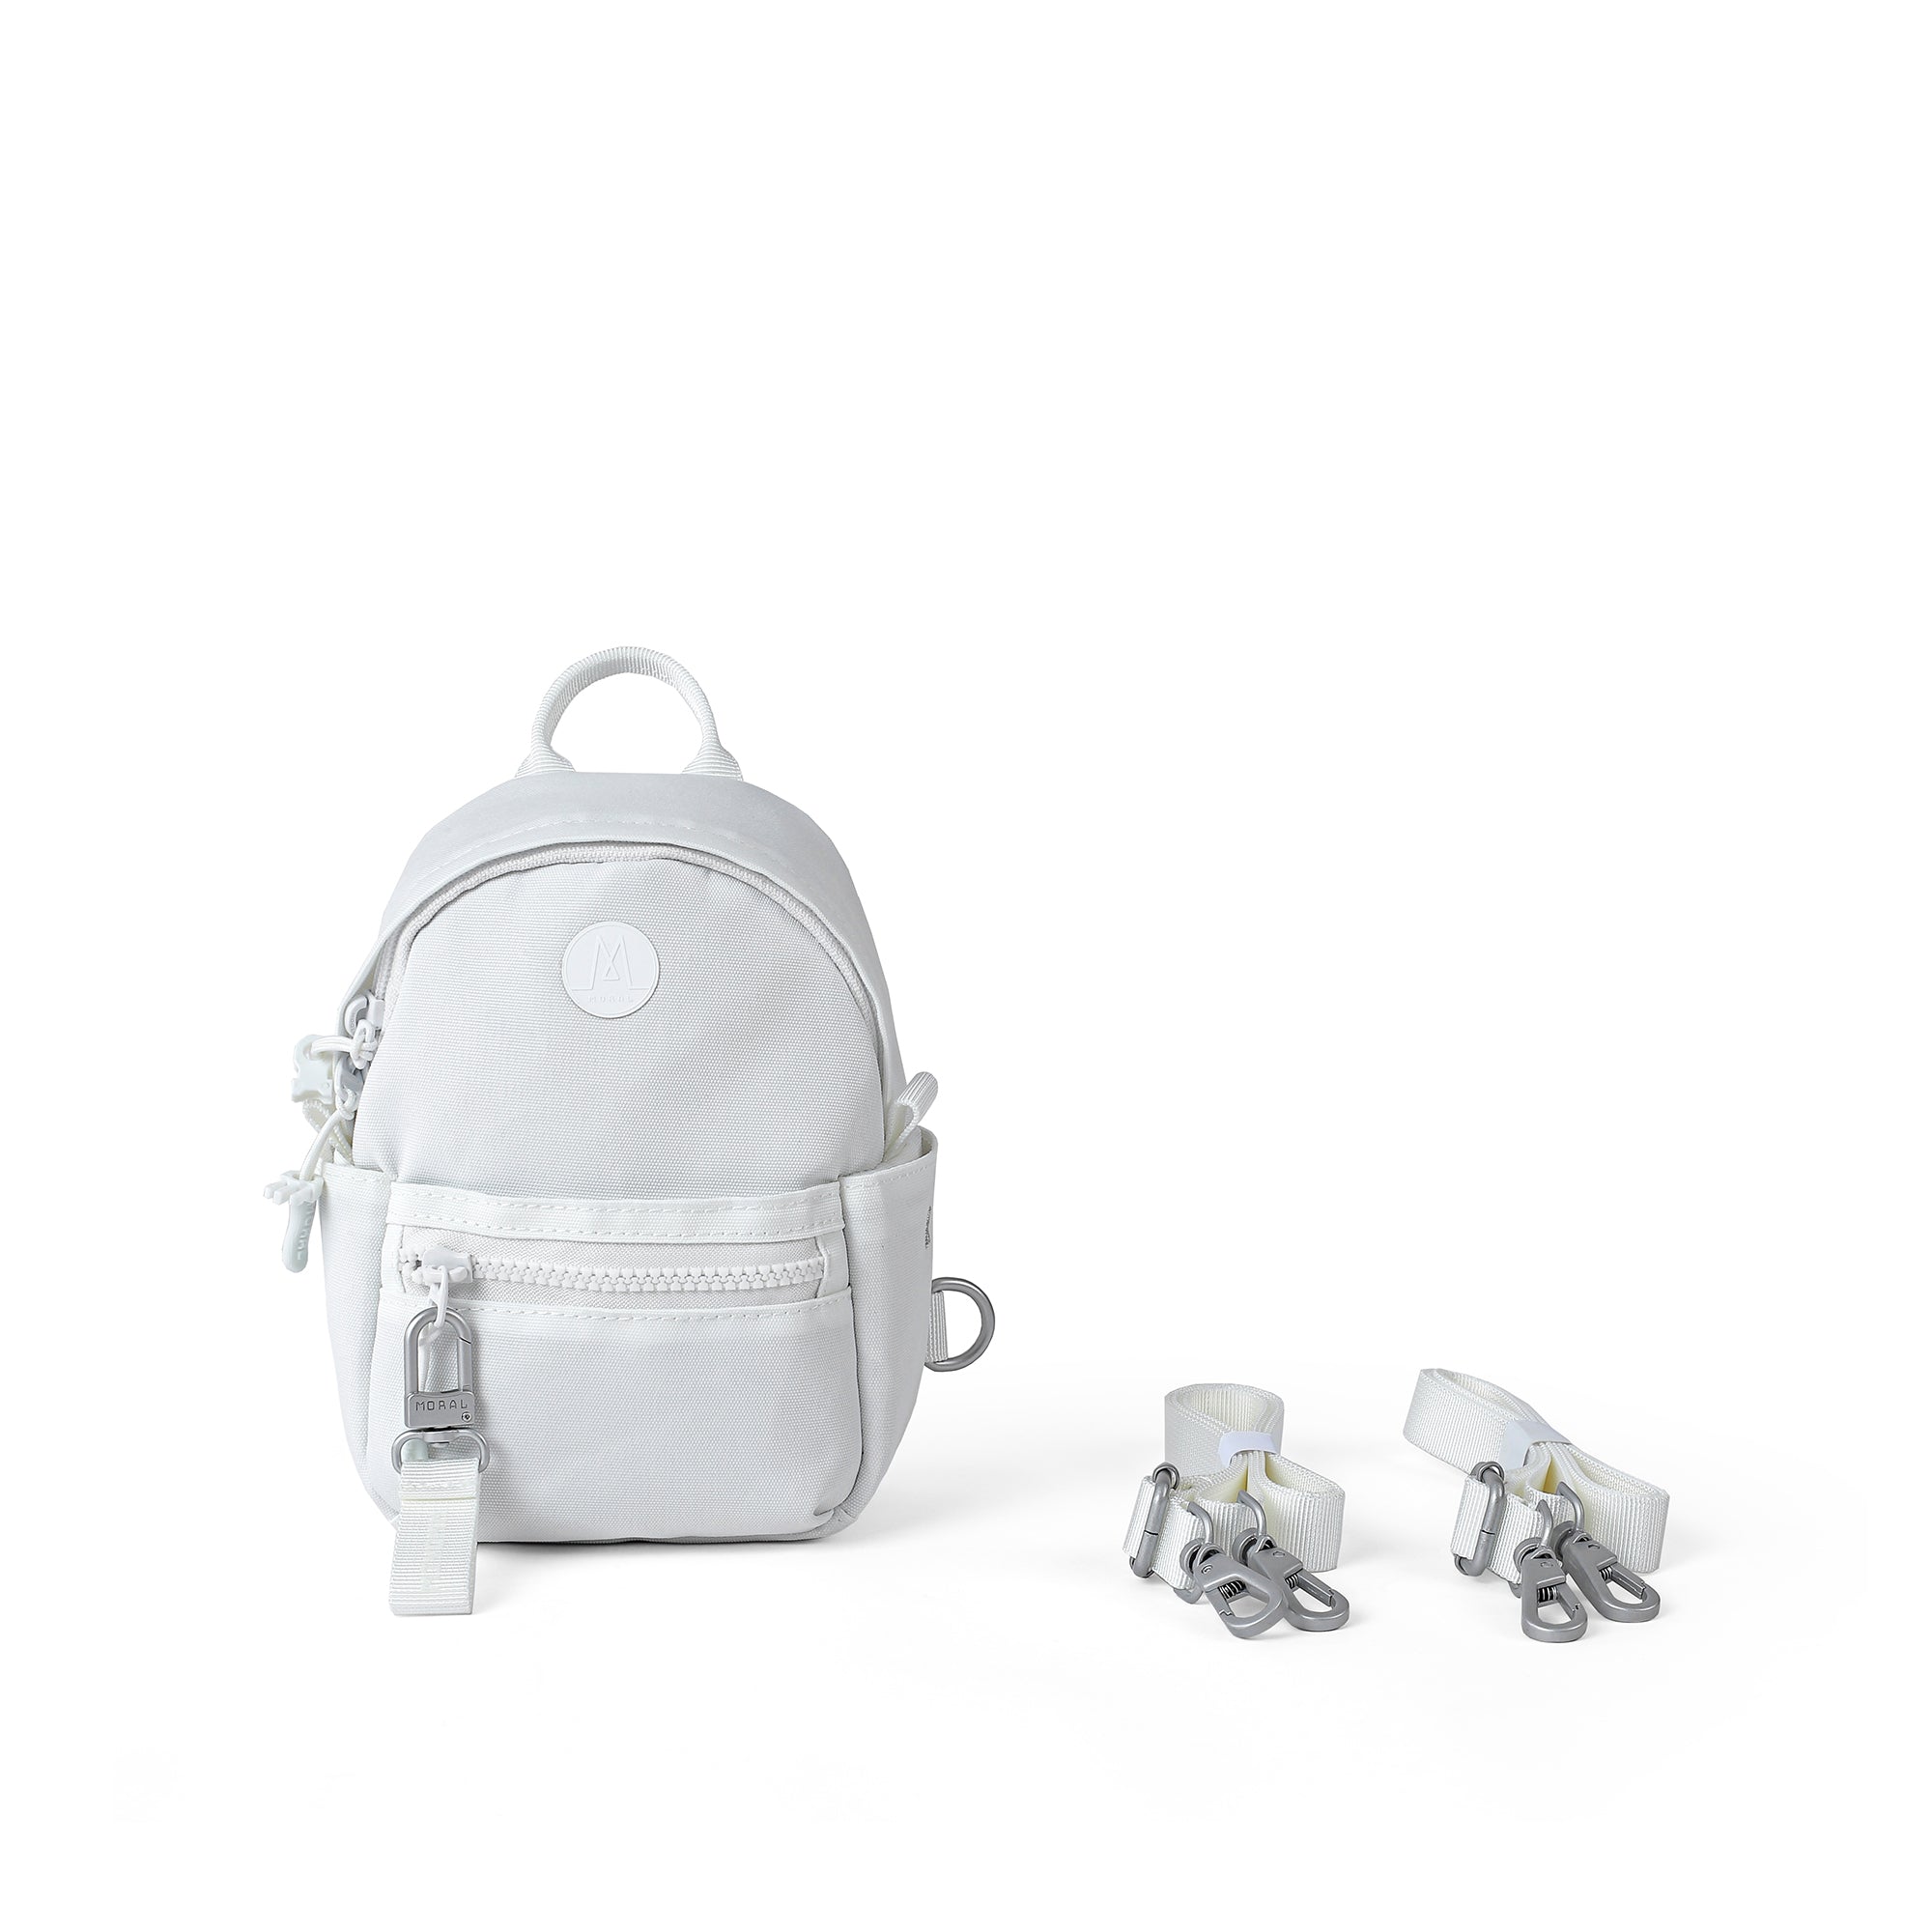 "MIYOMM x MORAL" Fast-degrading Tait Tiny Backpack 2.2L